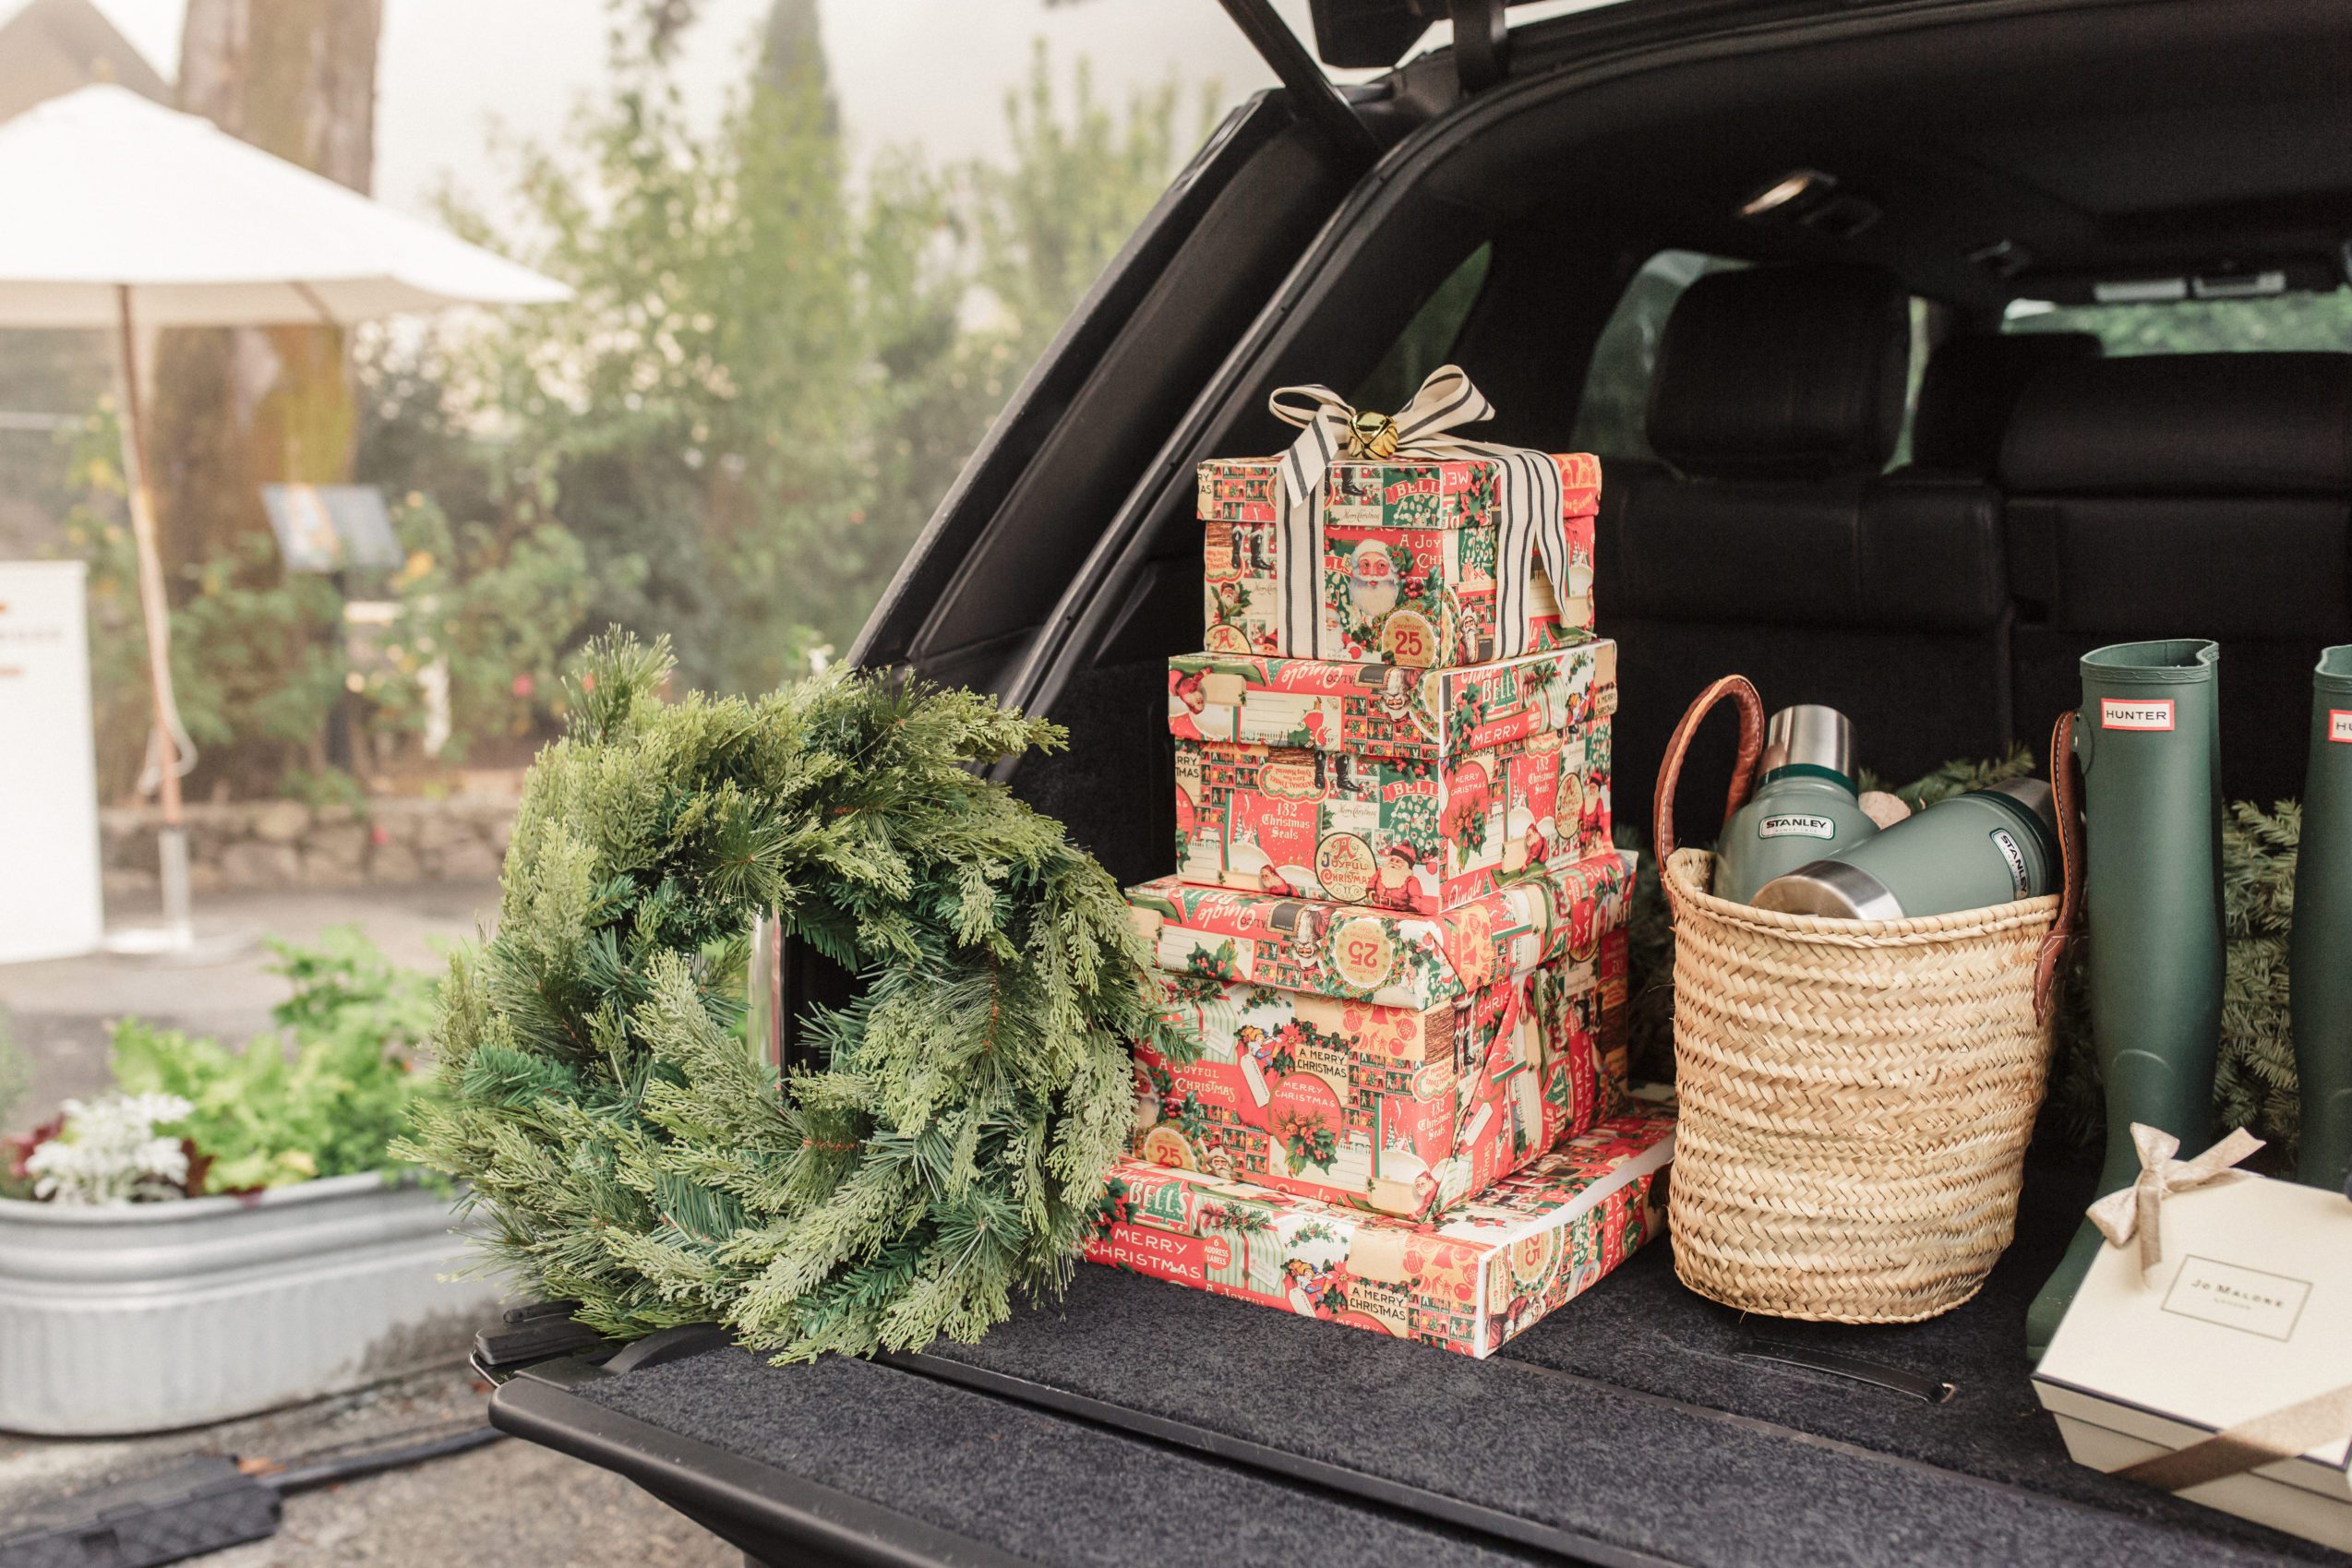 Christmas presents, a wreath, and other goods in the back of a car's trunk